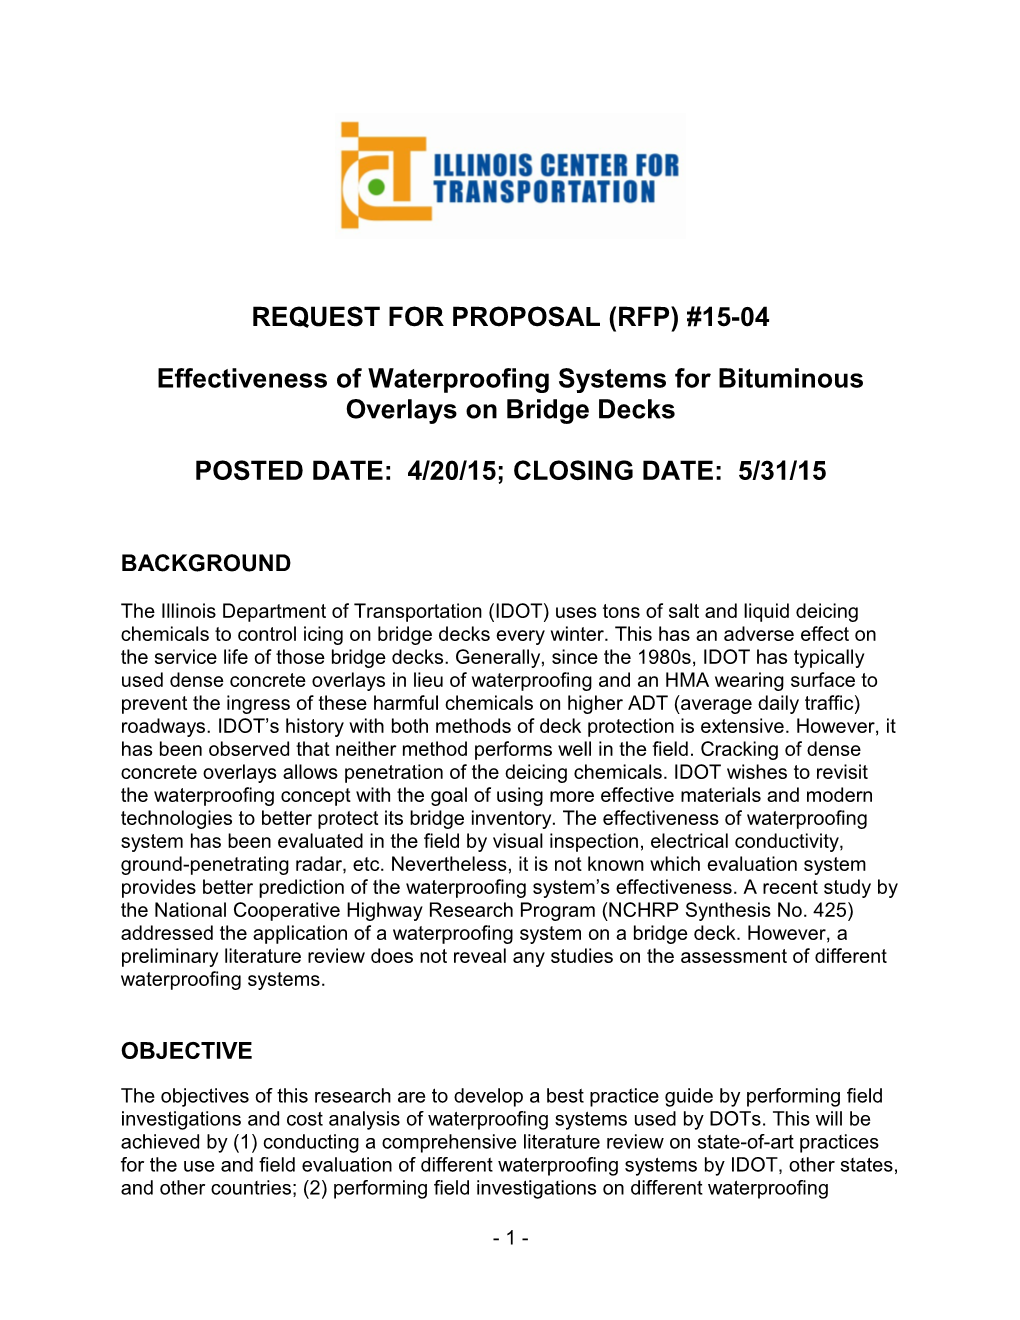 Request for Proposal (Rfp) #15-04